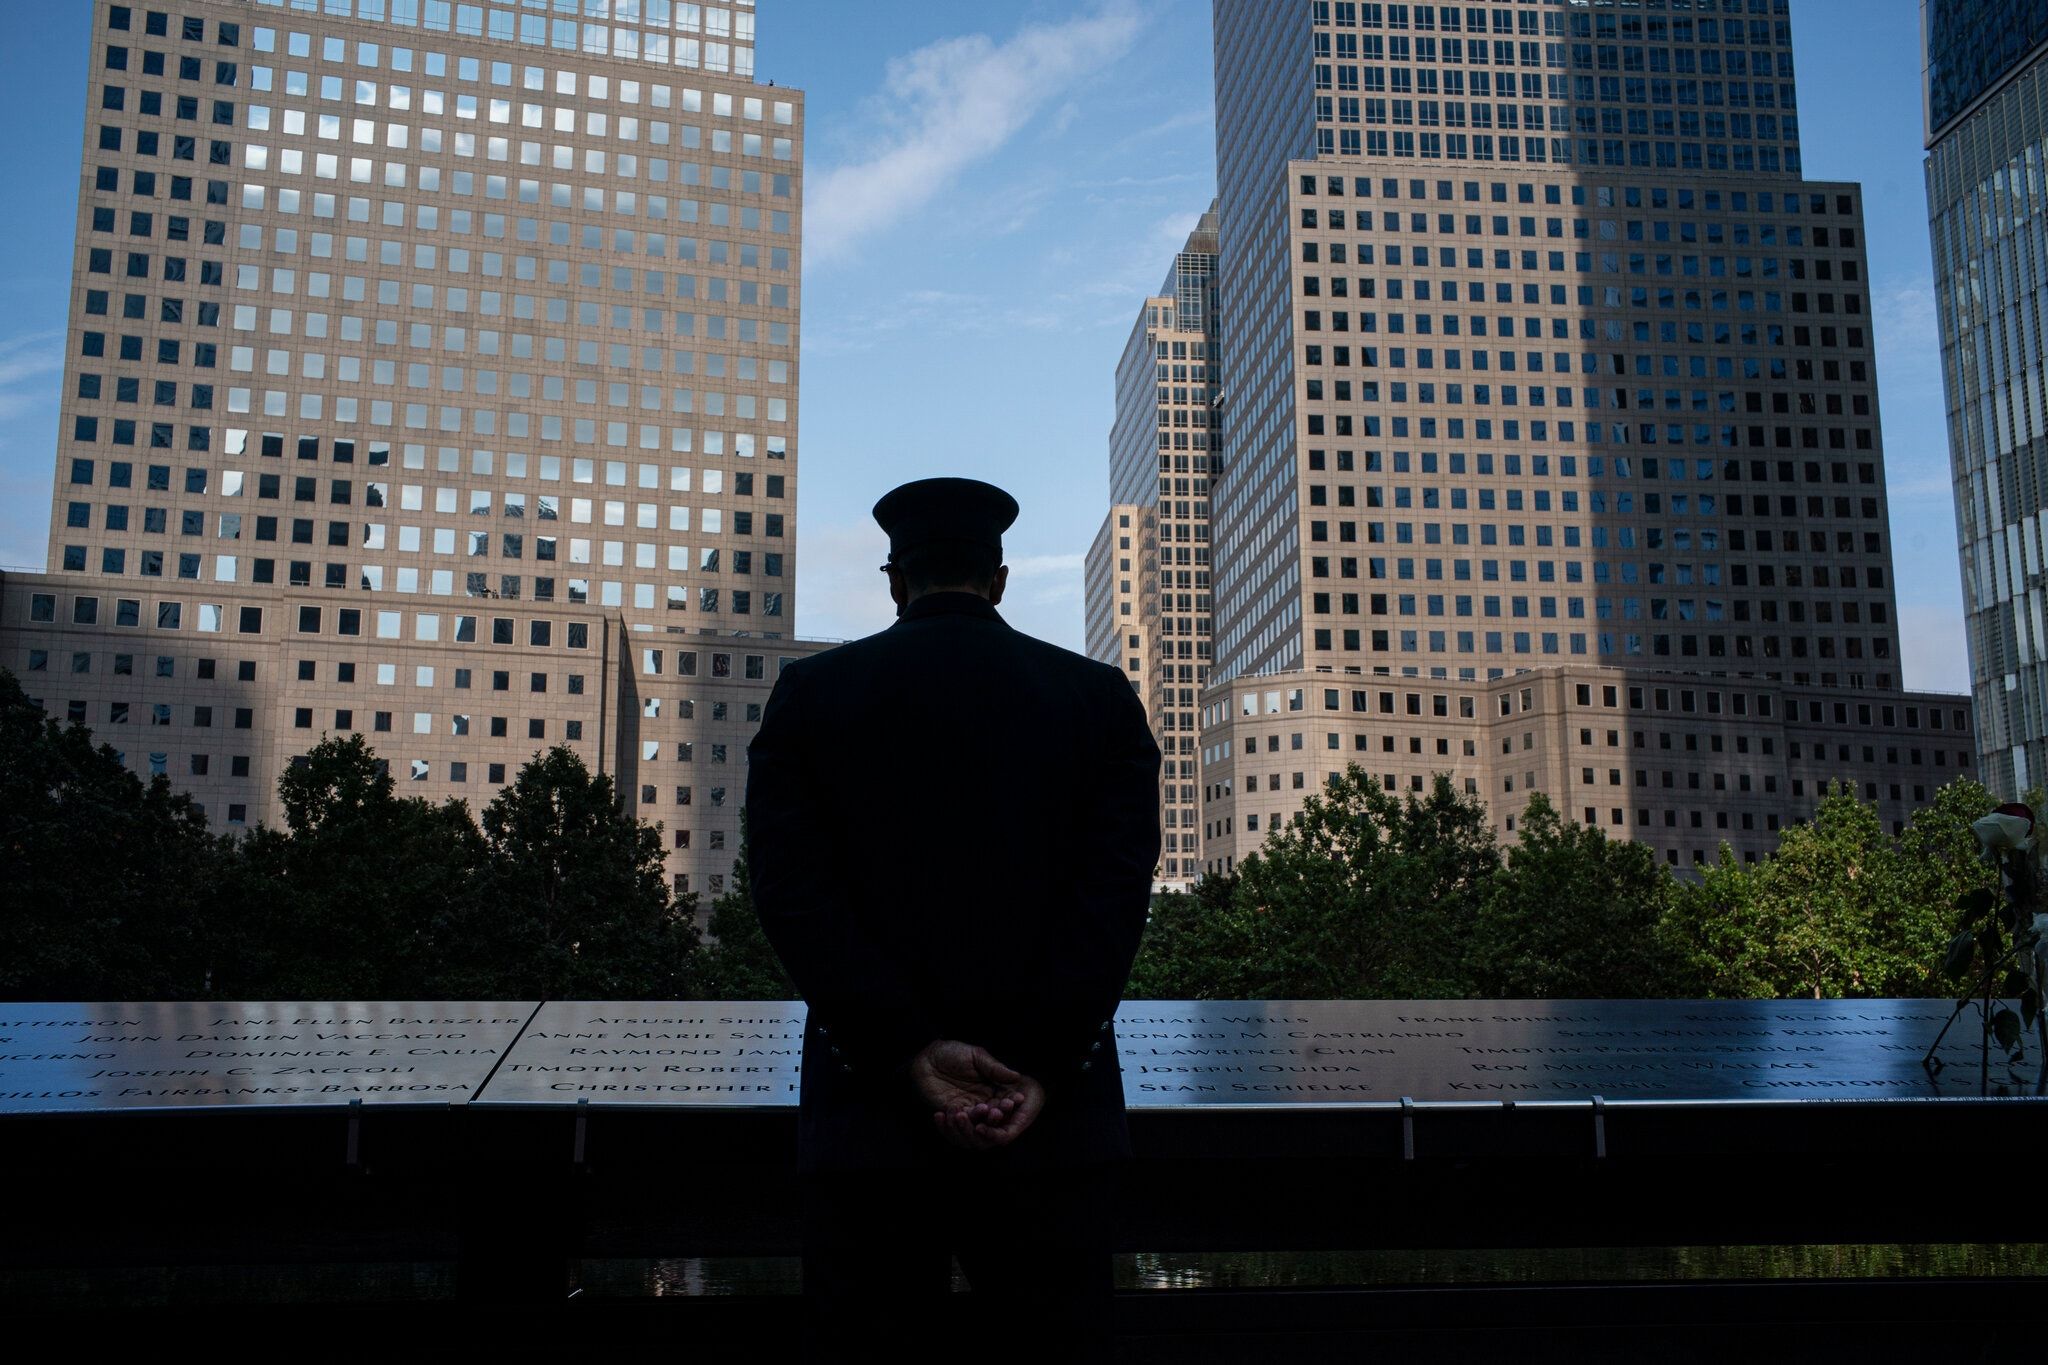 A memorial to the victims of the Sept. 11, 2001, attacks this year in New York. The start of the trial of the accused mastermind Khalid Shaikh Mohammed and four accused co-conspirators will now start on Nov. 7, 2021, at the earliest. Image by Todd Heisler/The New York Times. United States, 2020.